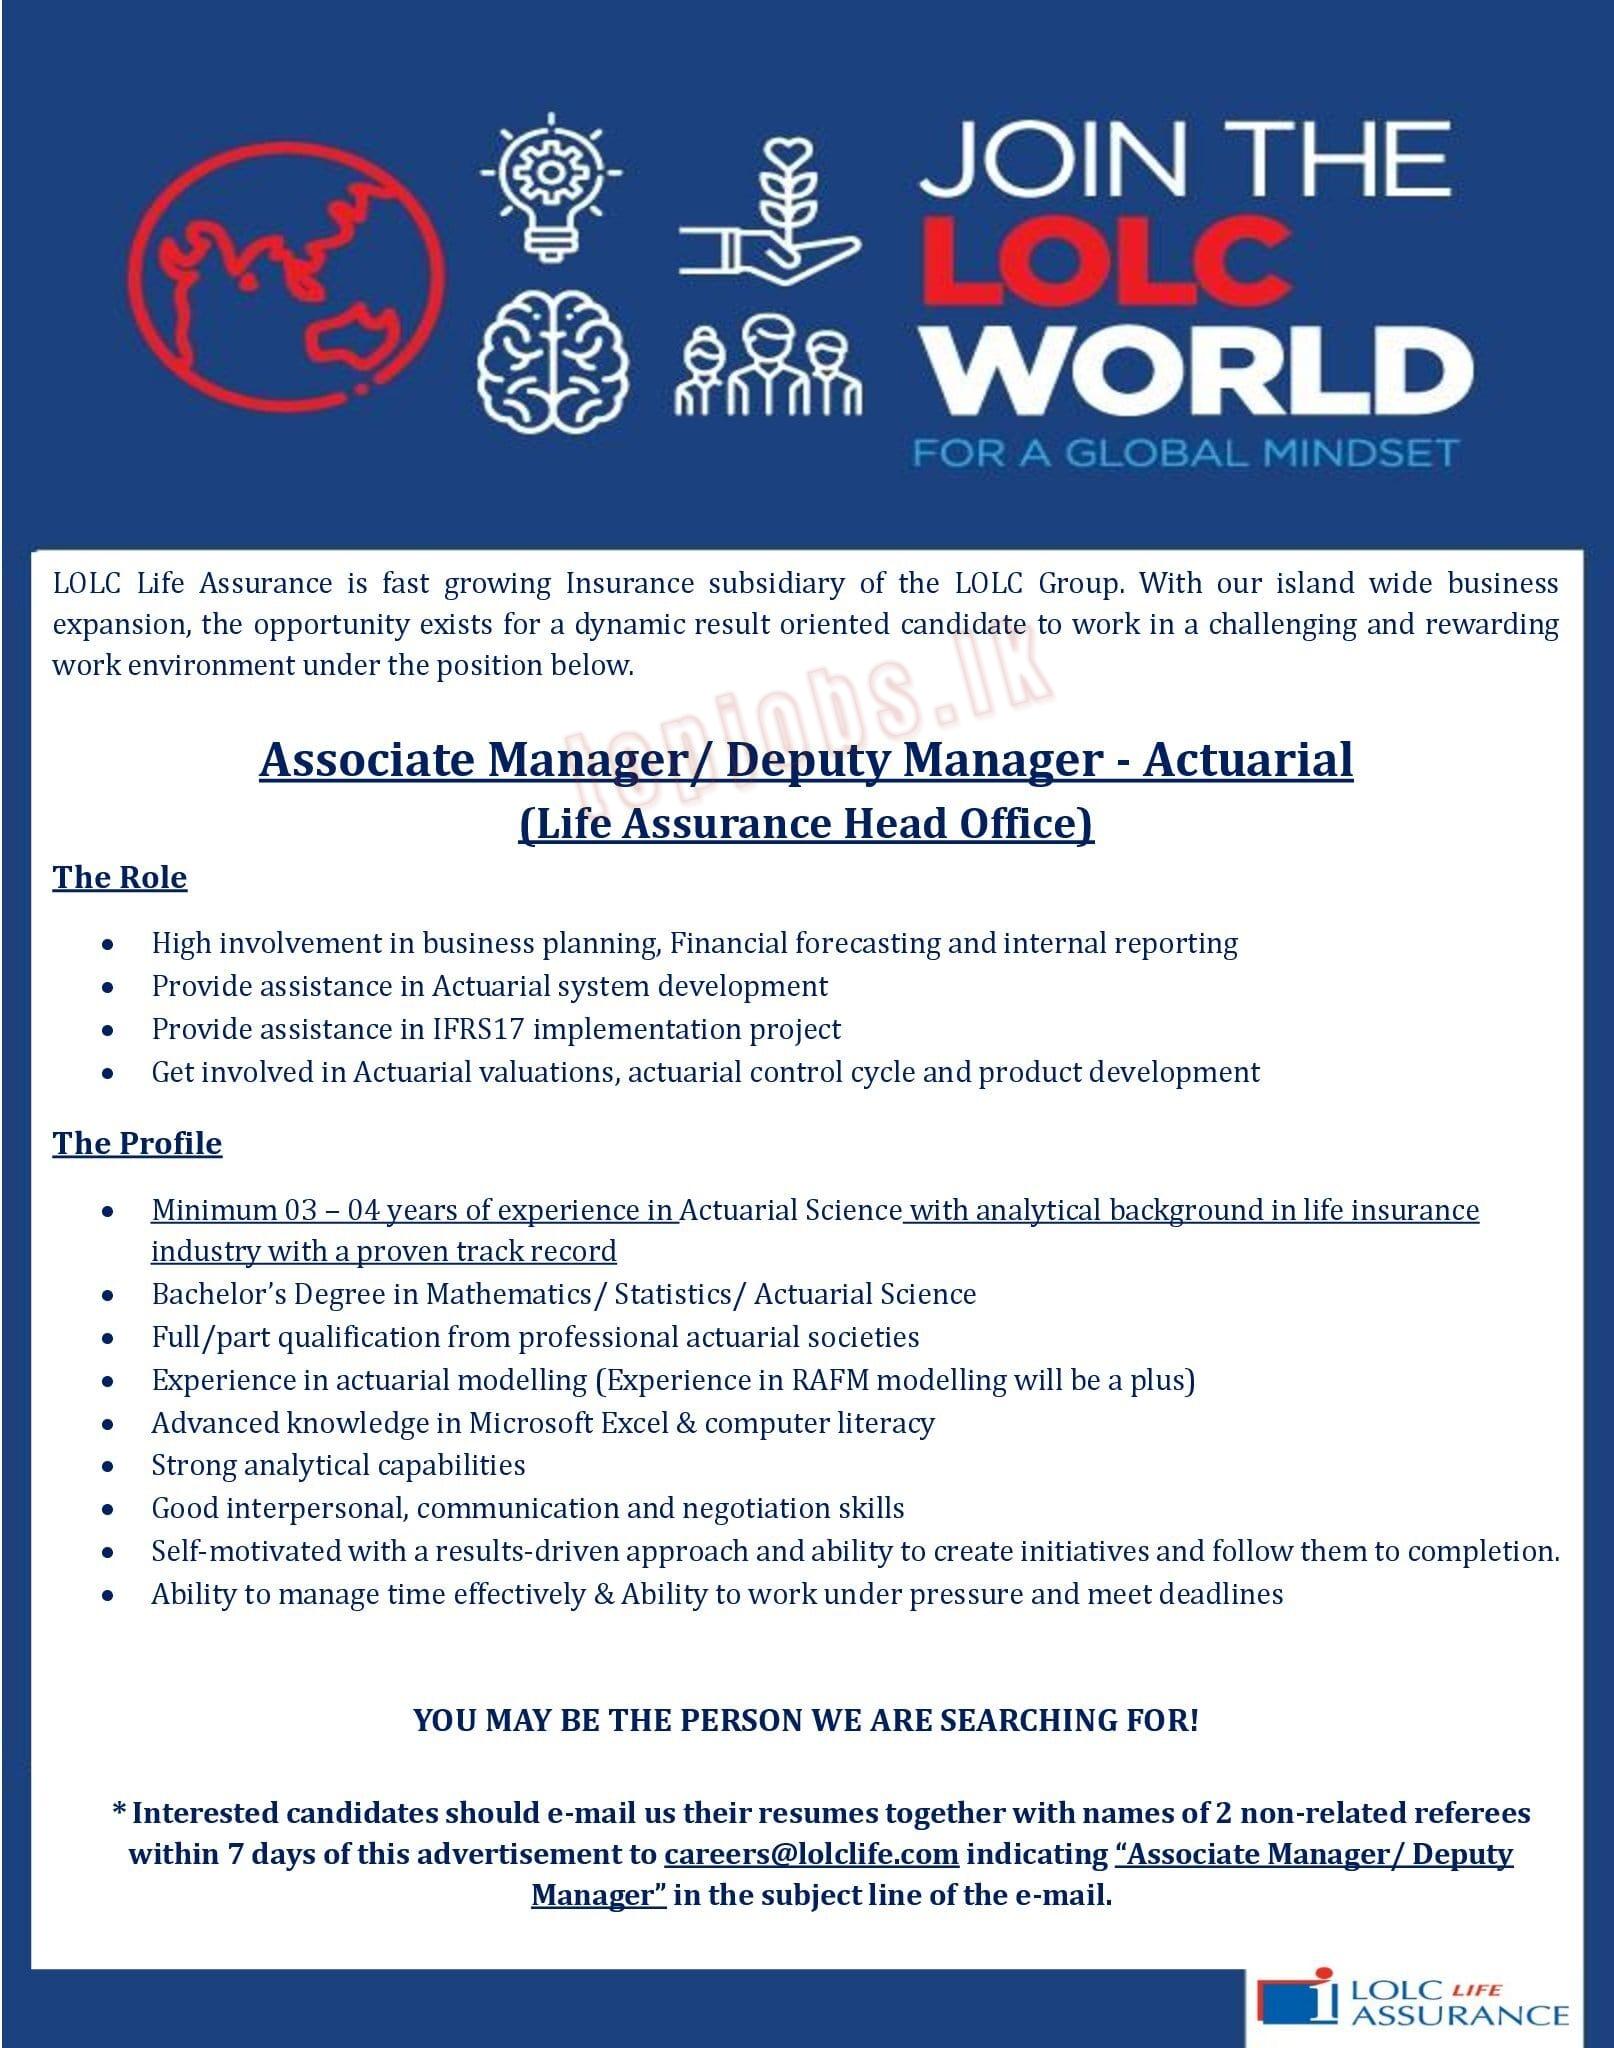 Associate Manager/ Deputy Manager Vacancies in LOLC Holdings